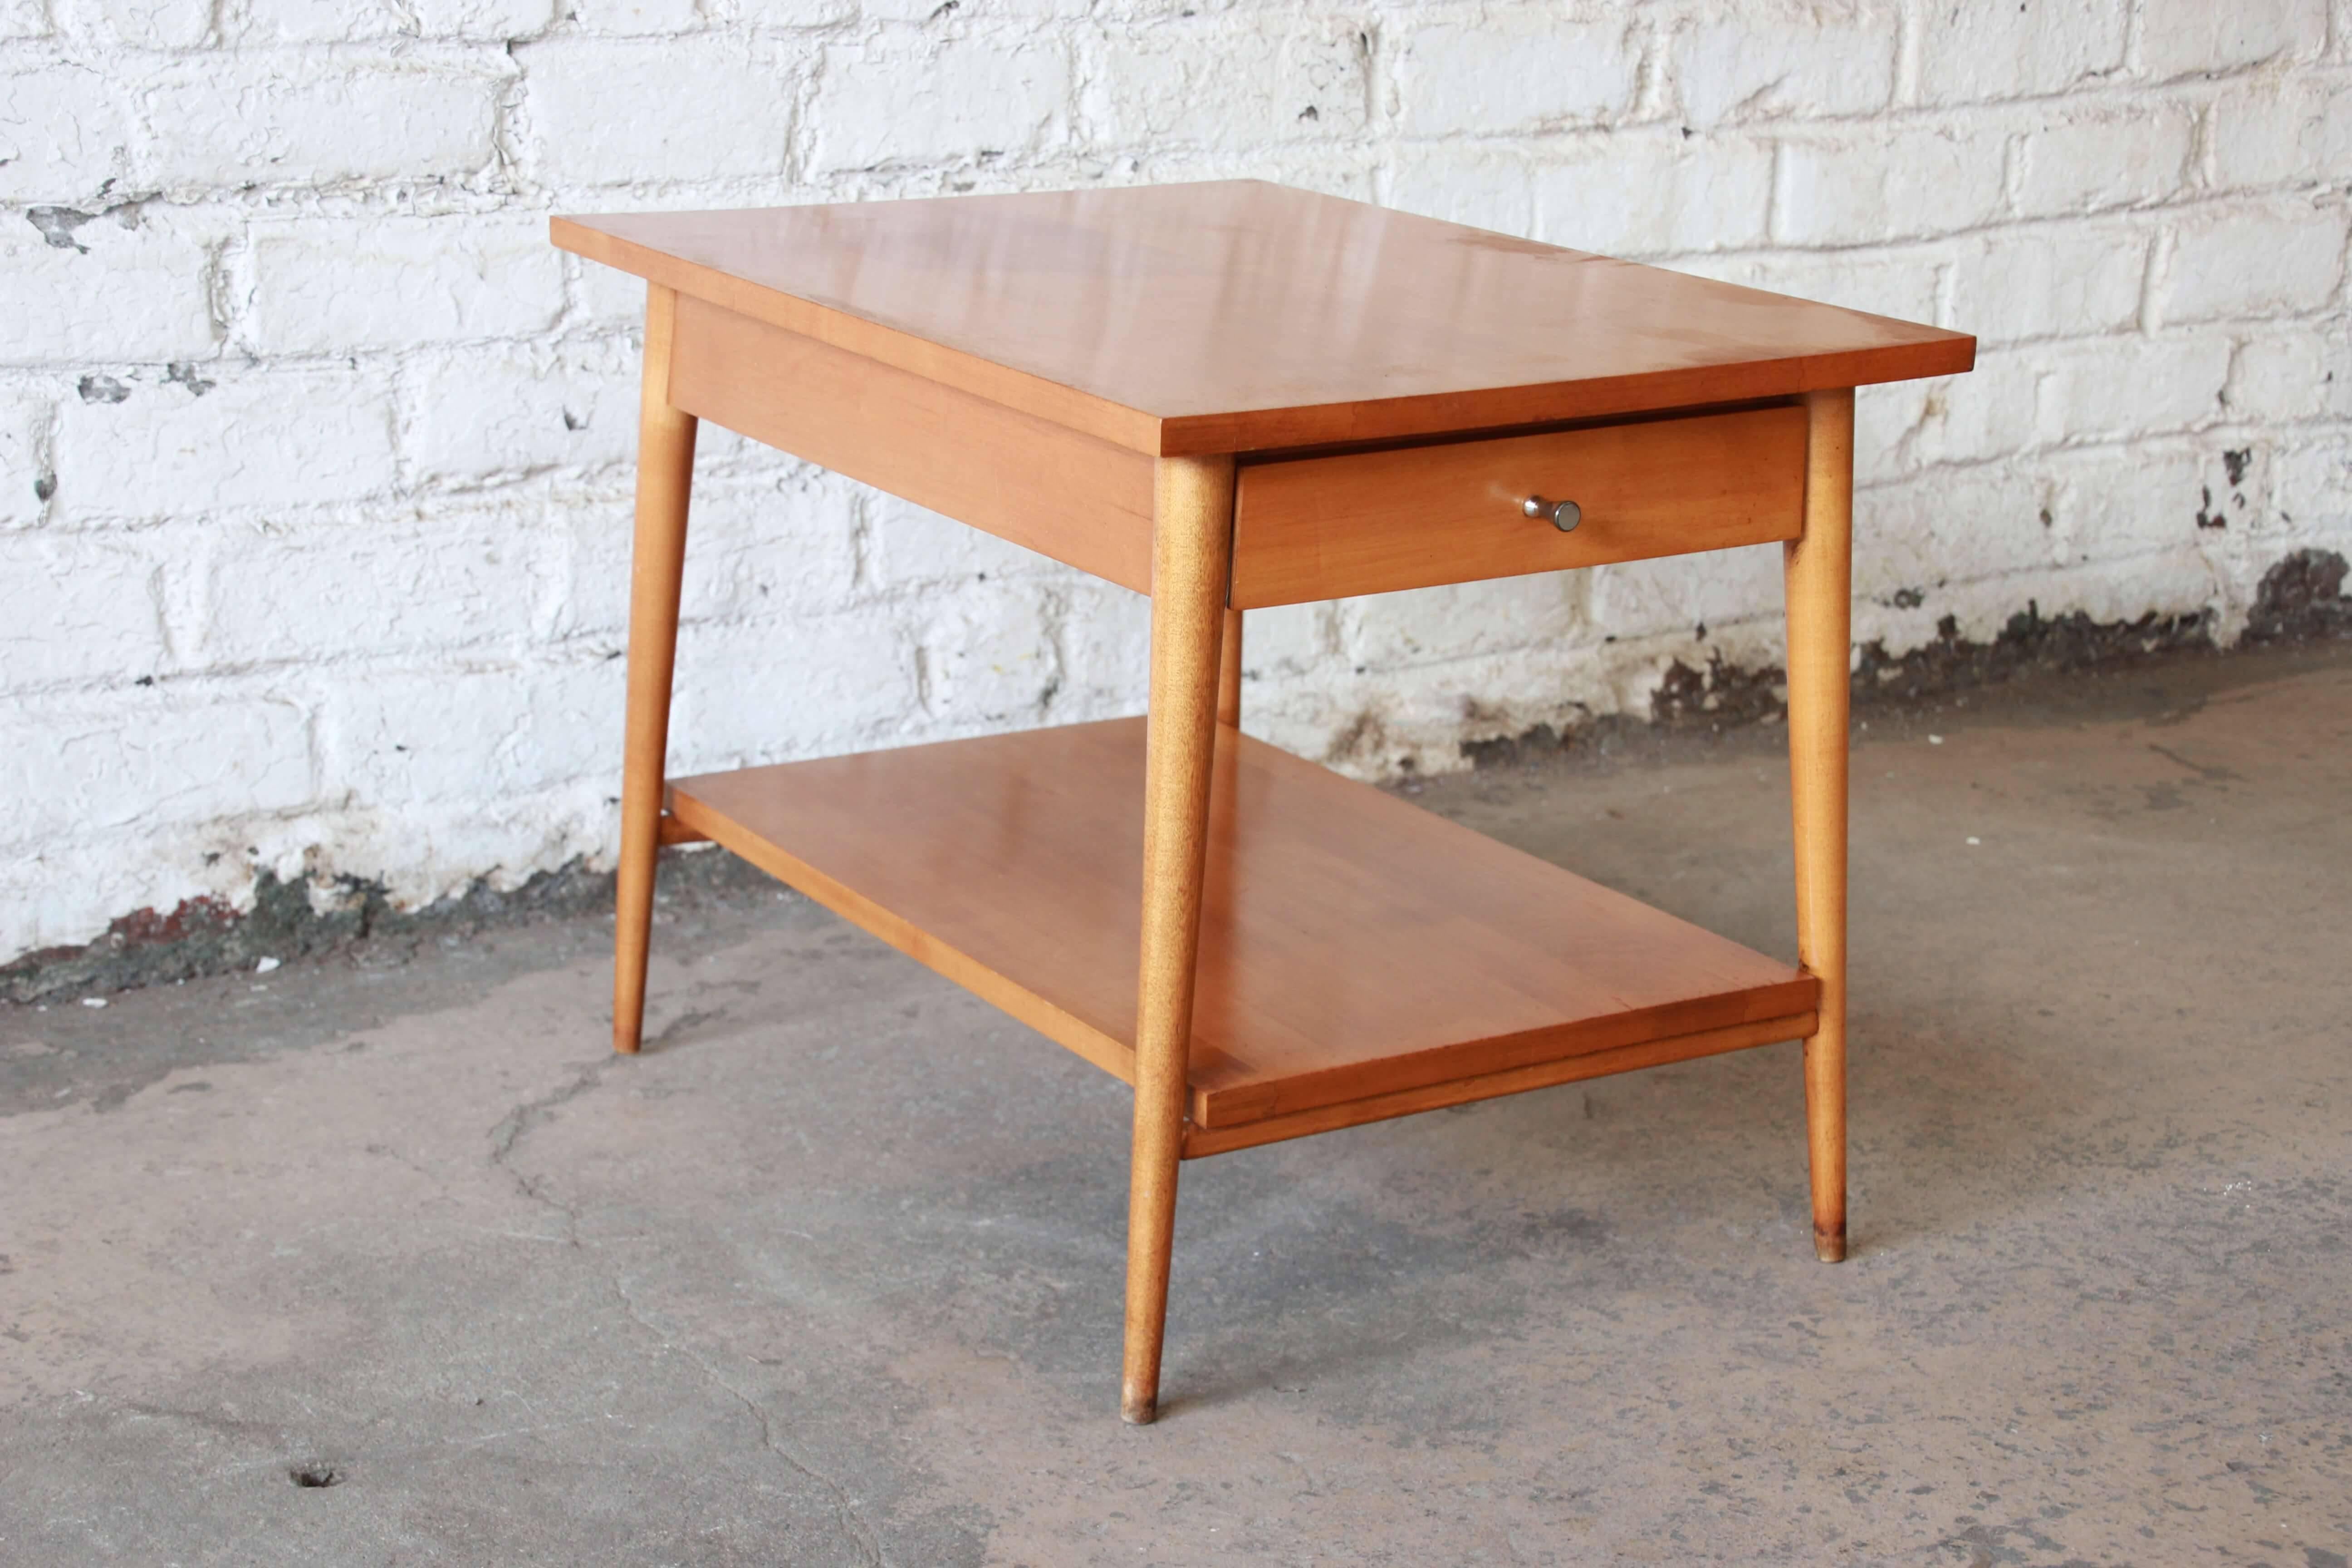 Offering a rare Mid-Century Modern two-tier side table or nightstand designed by Paul McCobb for his iconic Planner Group line for Winchendon Furniture. The table features sleek Mid-Century lines and solid birch construction. It offers one drawer